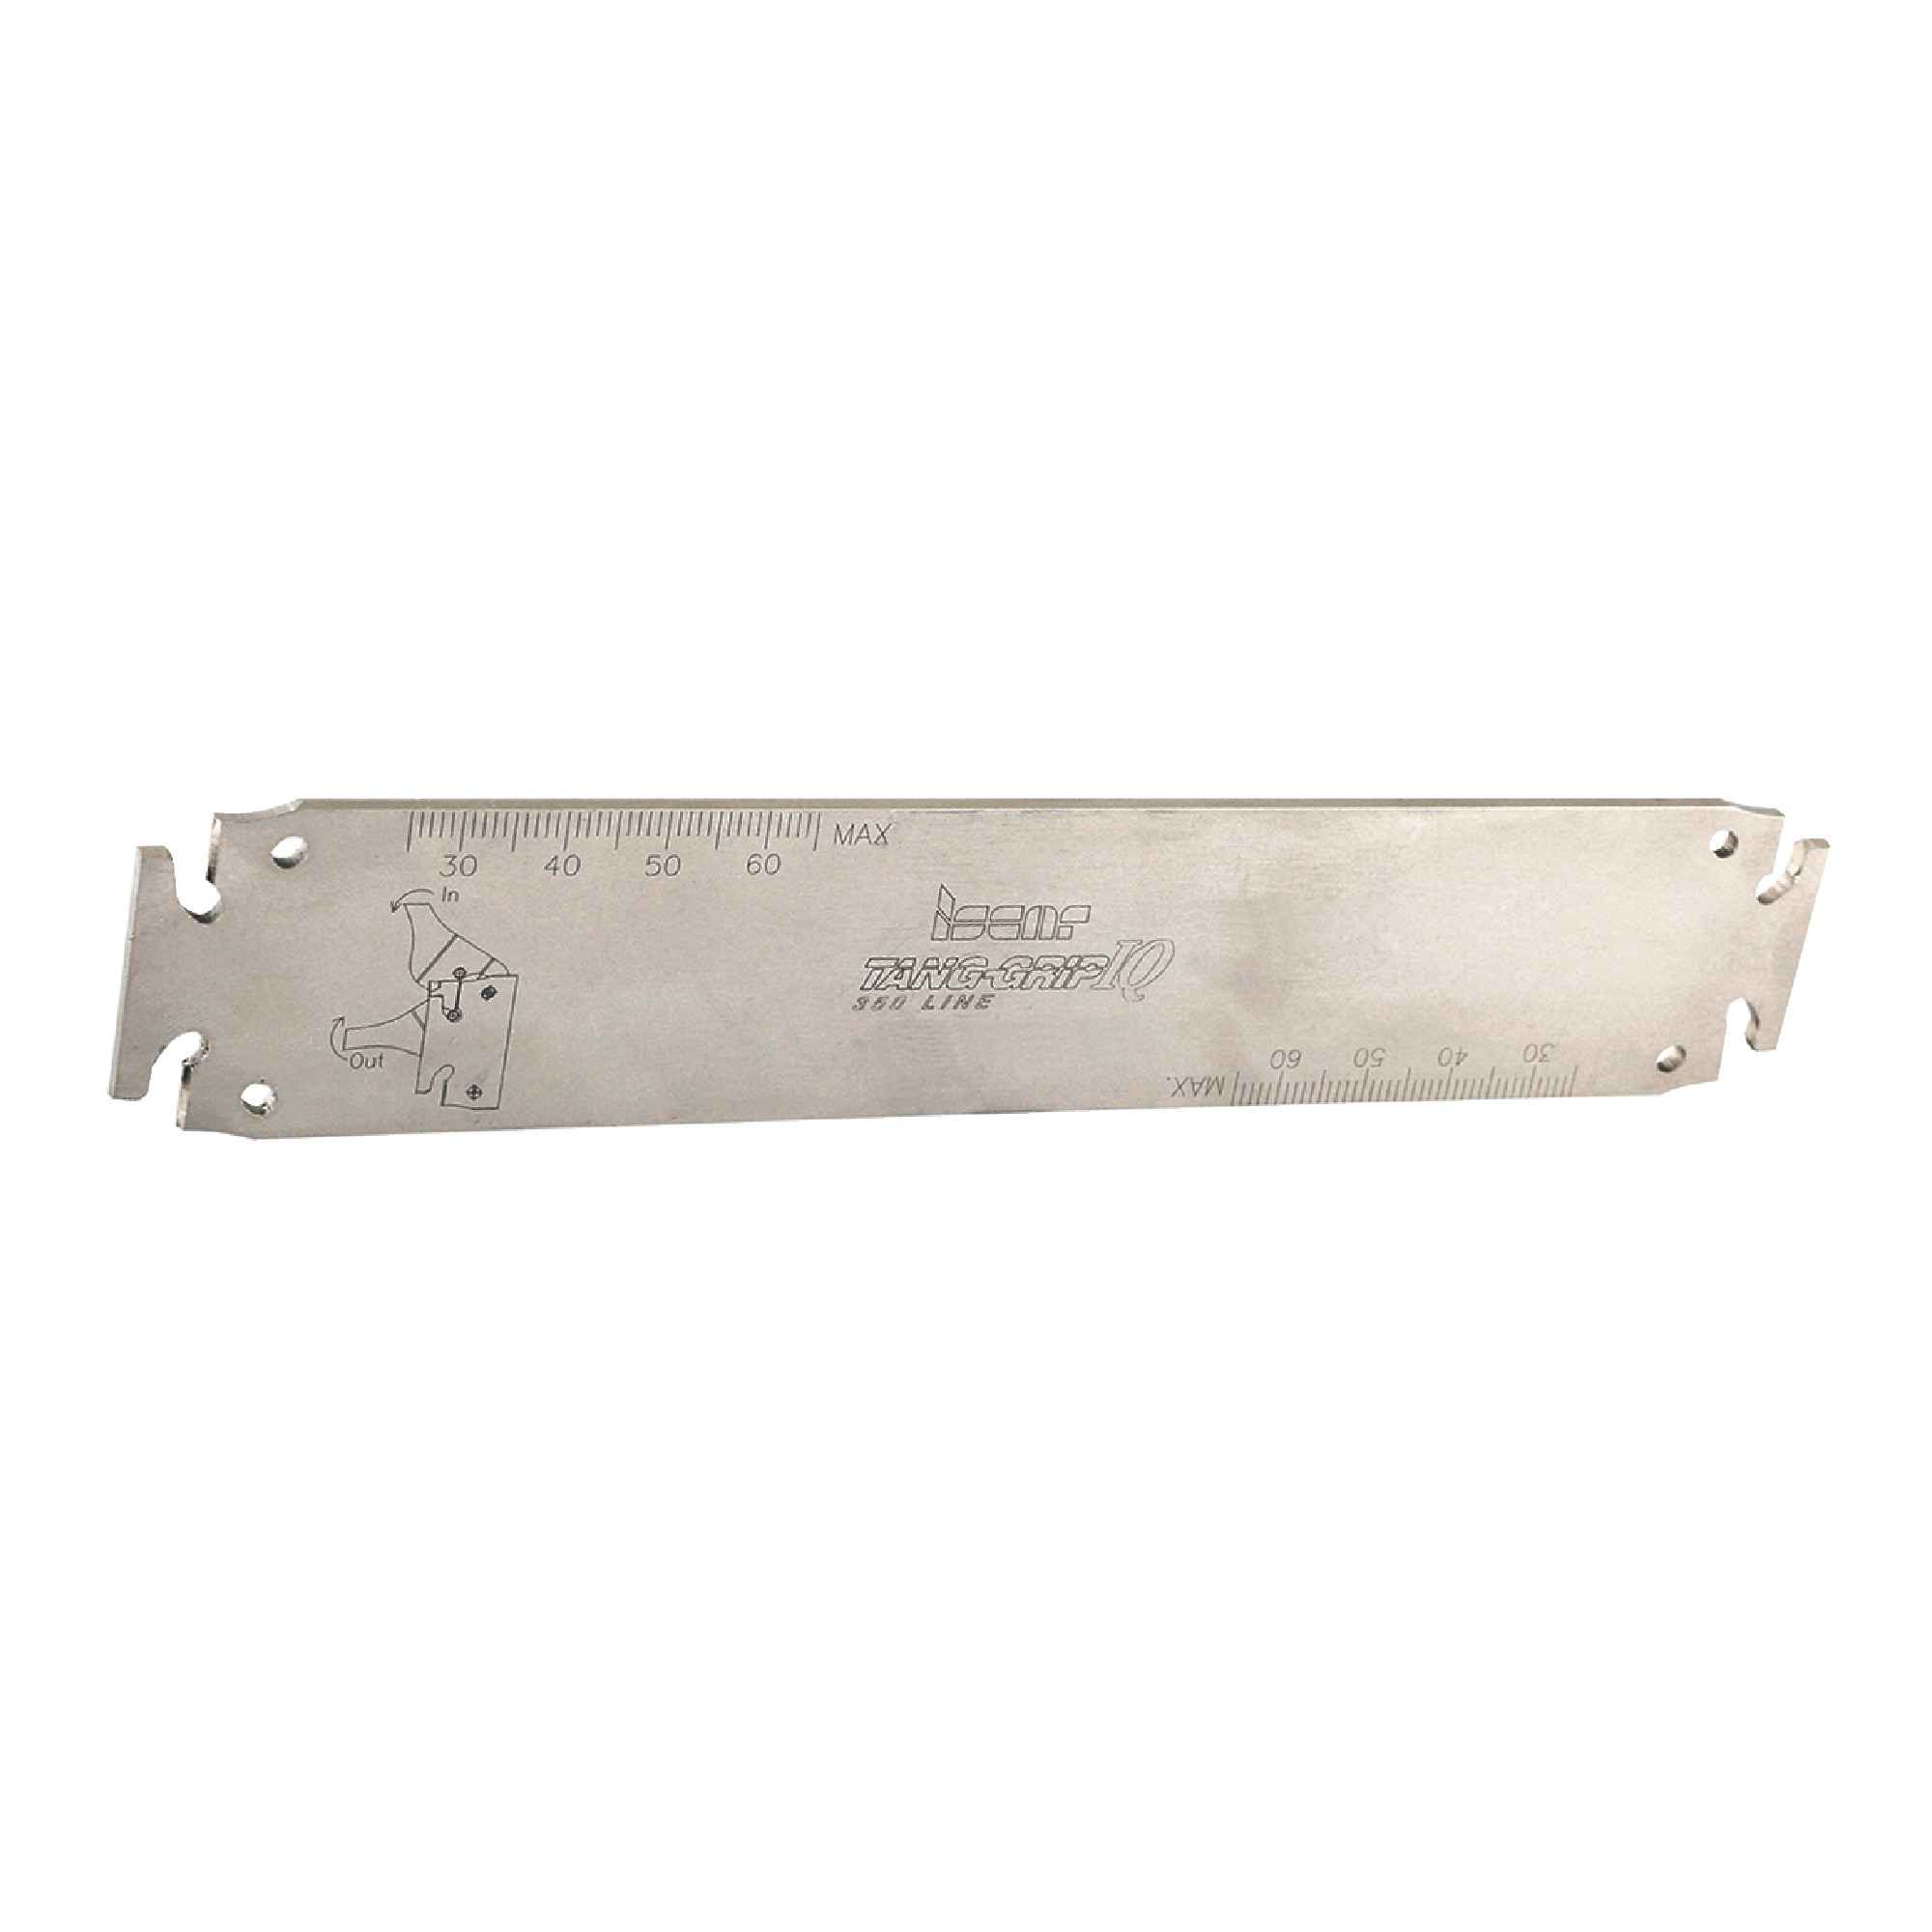 ISCAR - TGSU 35-4-IQ-4Z Parting Blade / TAG N4 Inserts / 1.378" (35mm) Blade Height / NEUTRAL / FLAT TOP / 4 TOOTH